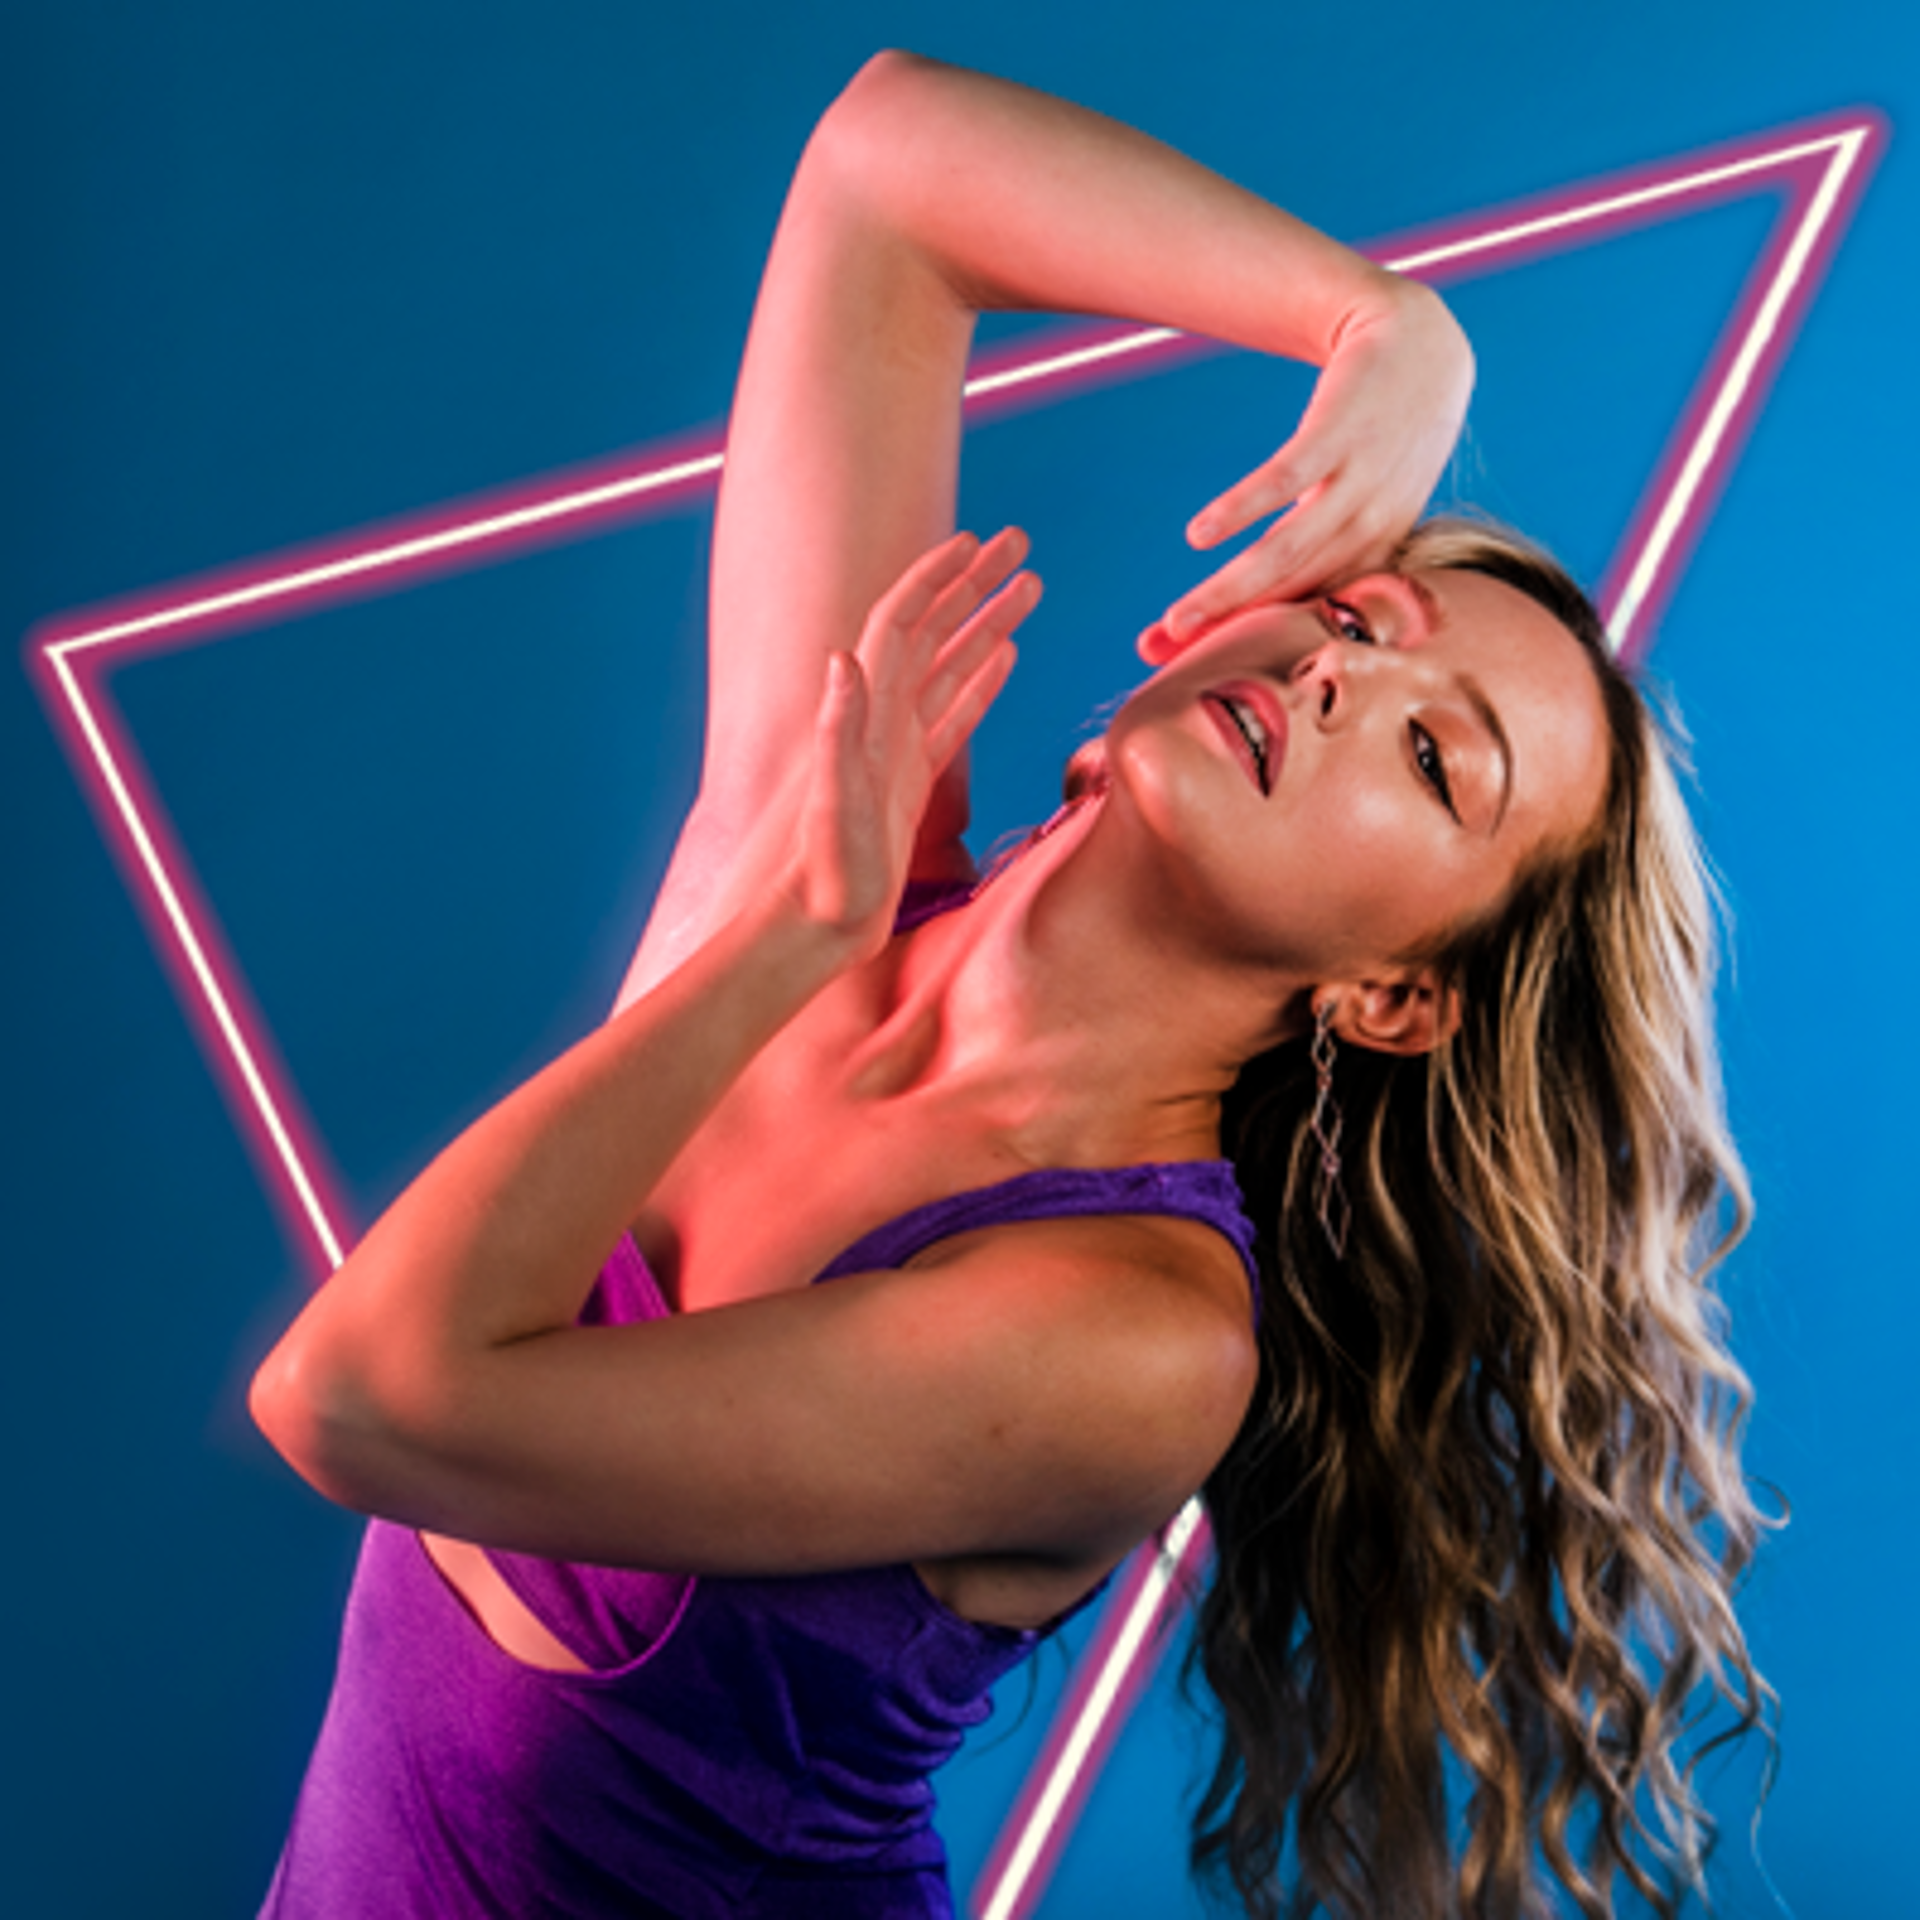 contemporary dancer flicking hair to the right side of the image with hands held either side of her face on bright blue studio backdrop. white blonde females wearing a long purple dress. 